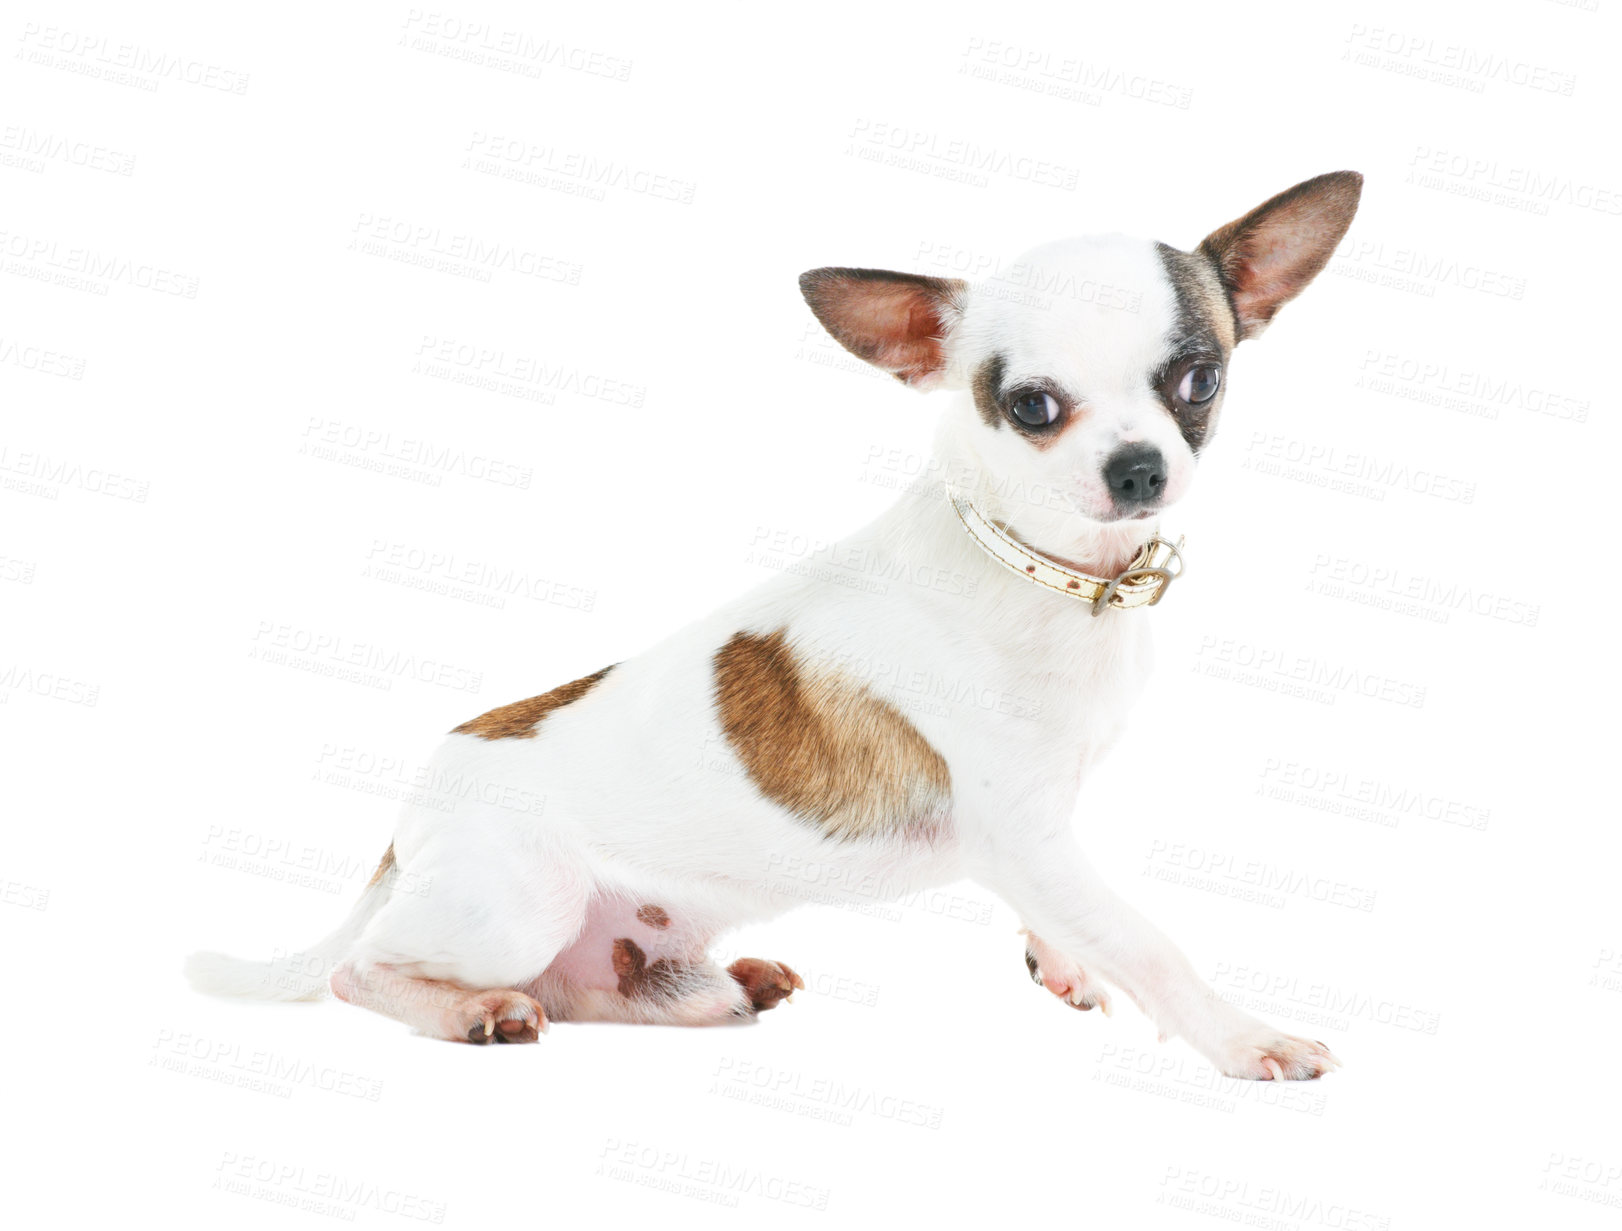 Buy stock photo Portrait of a Chihuahua sitting against white background.  Posh and cute little brown and white dog with a collar posing. One loyal purebred miniature puppy or well trained domesticated pet in studio